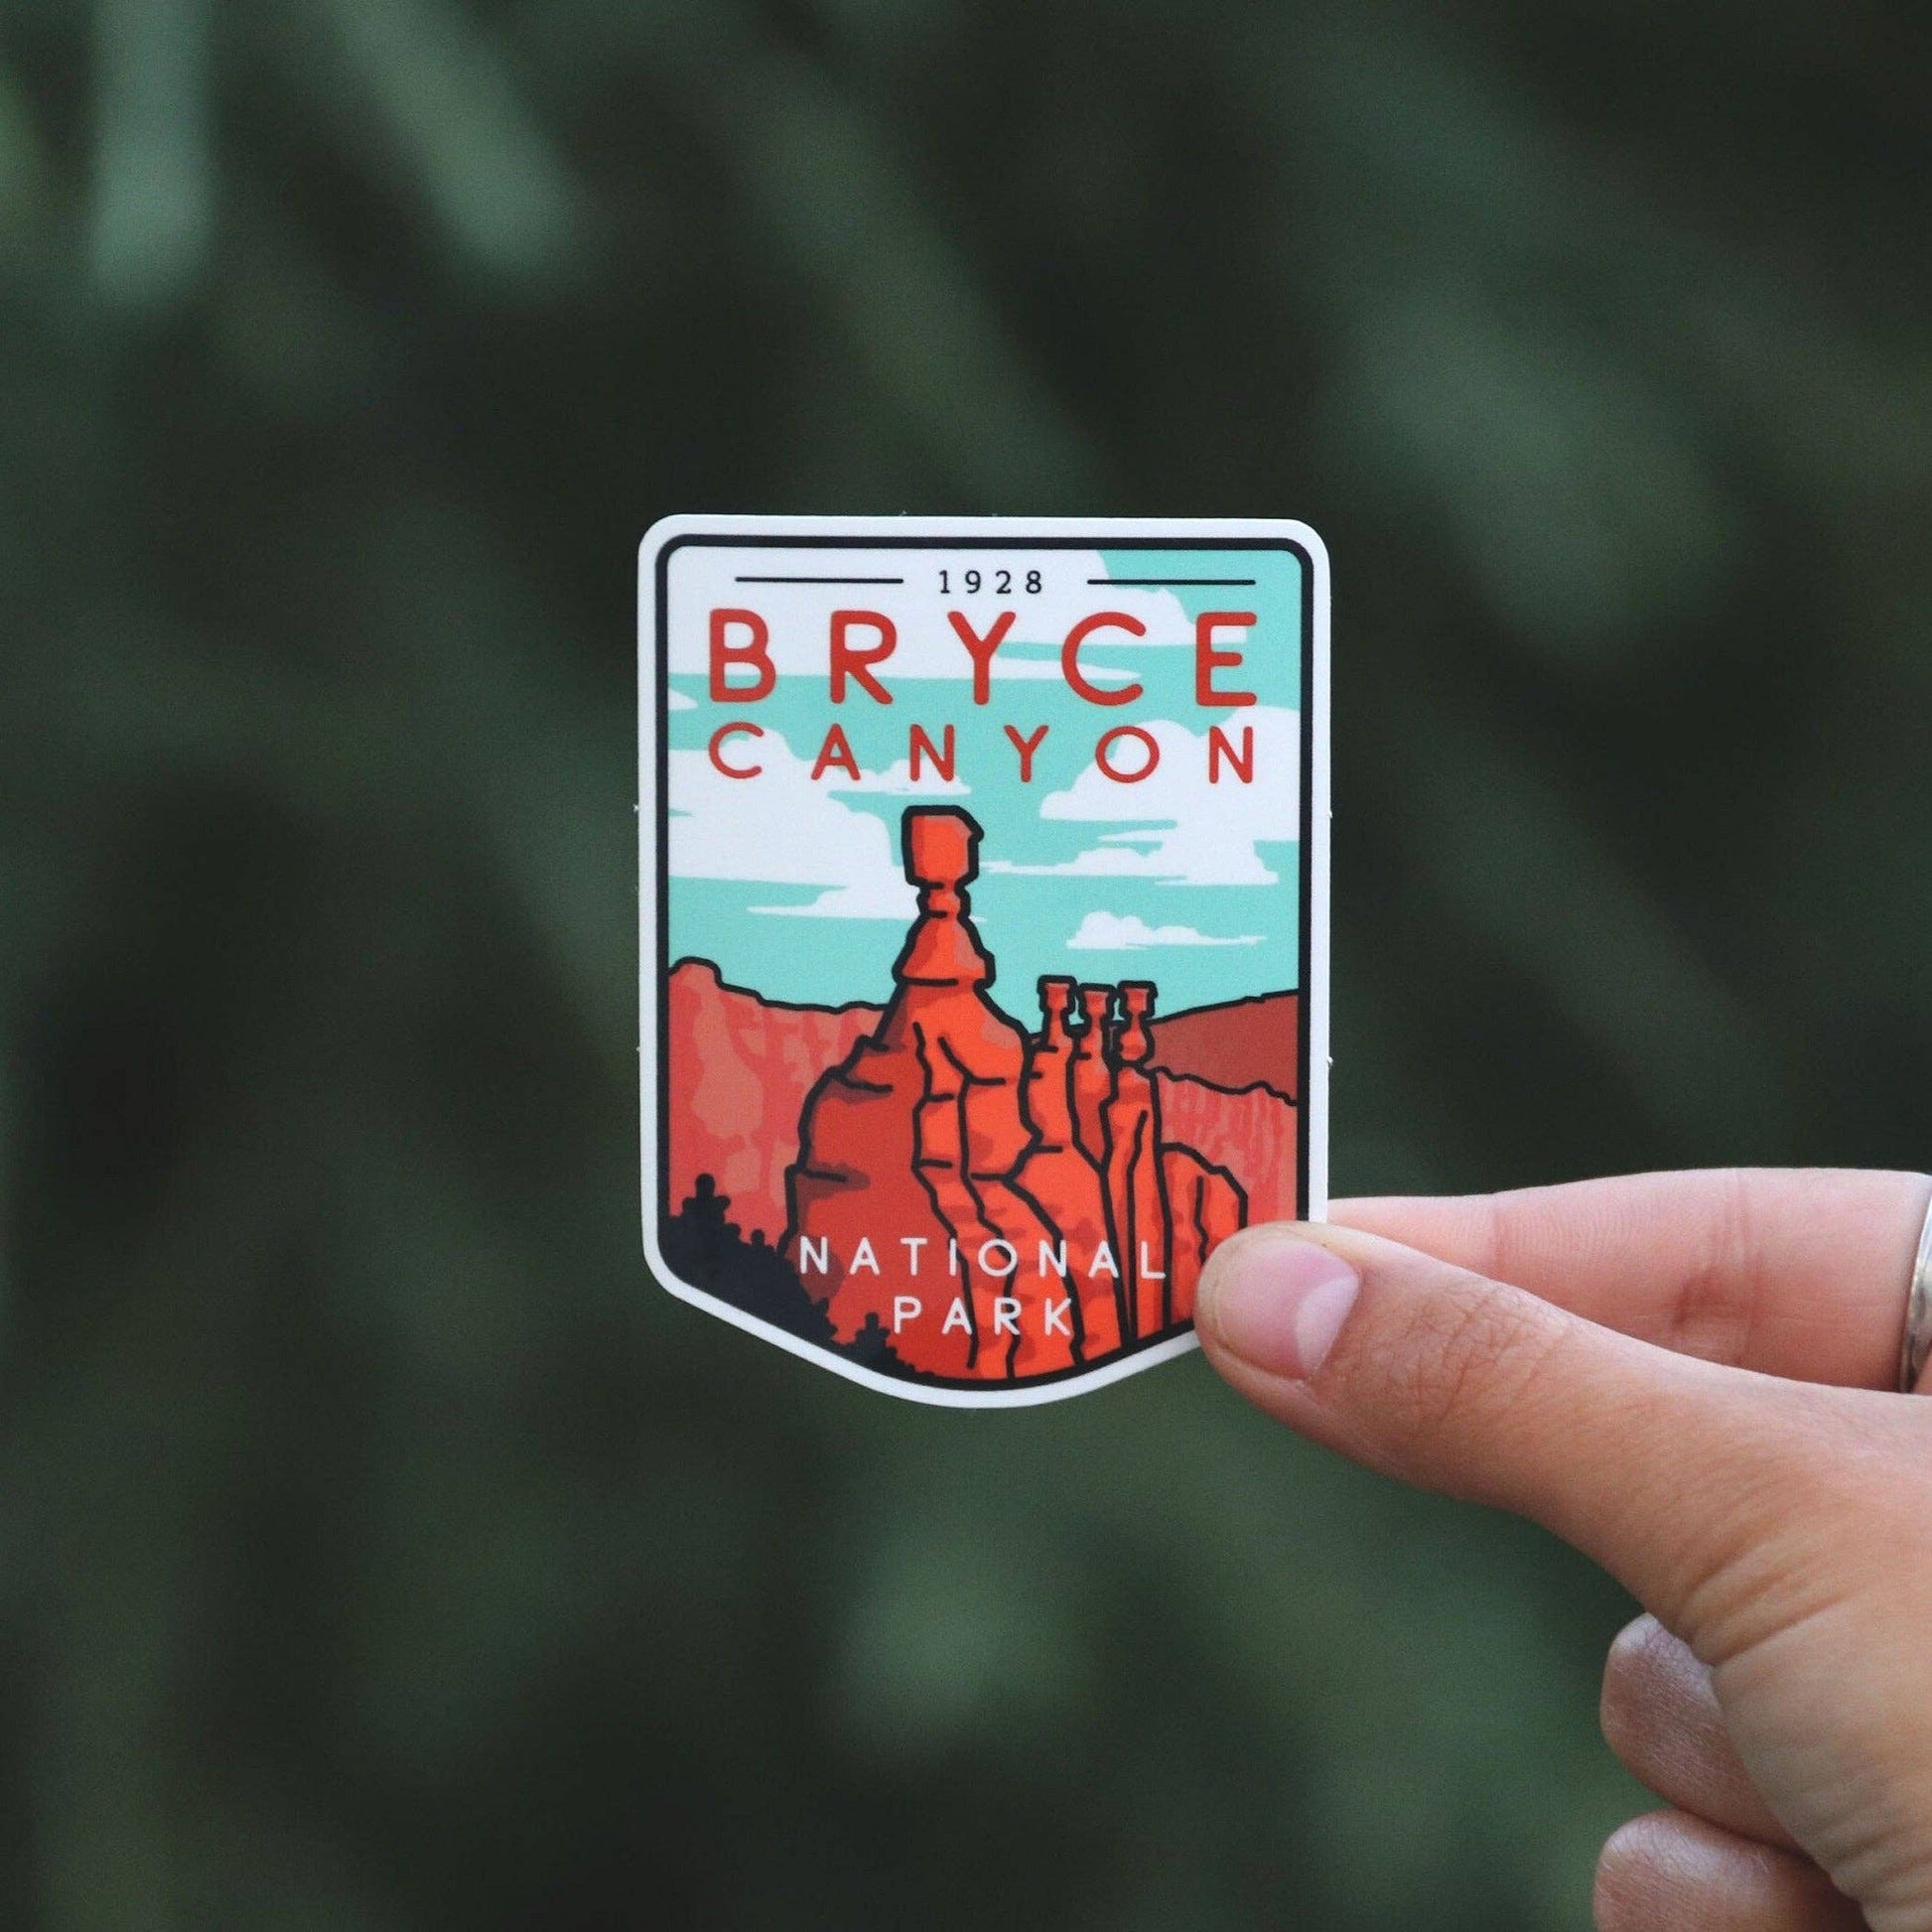 Bryce Canyon National Park - Waterproof Vinyl Sticker, UV resistant Decal - Dixie Hike & Style